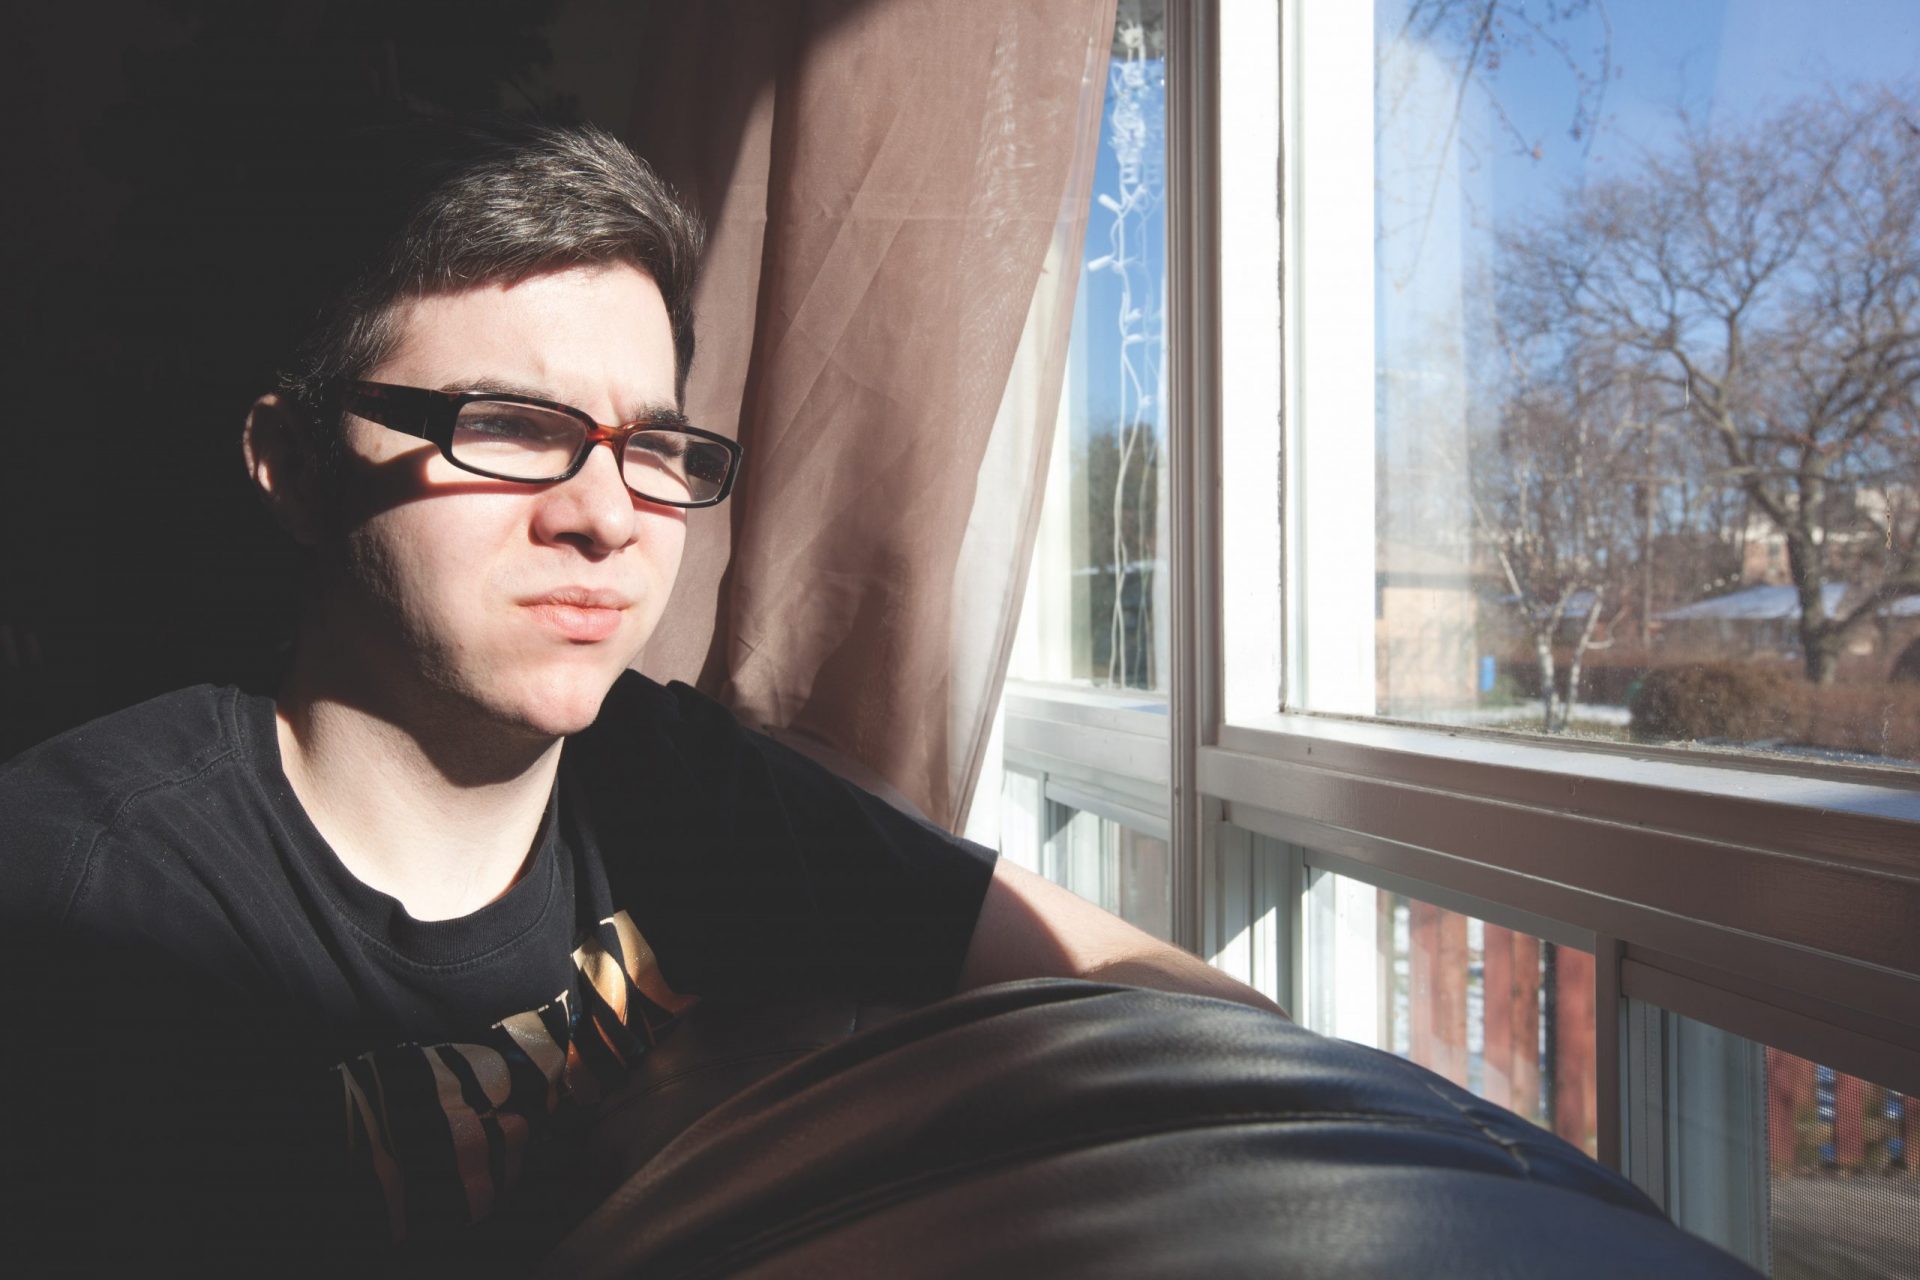 Young man with glasses looks out window